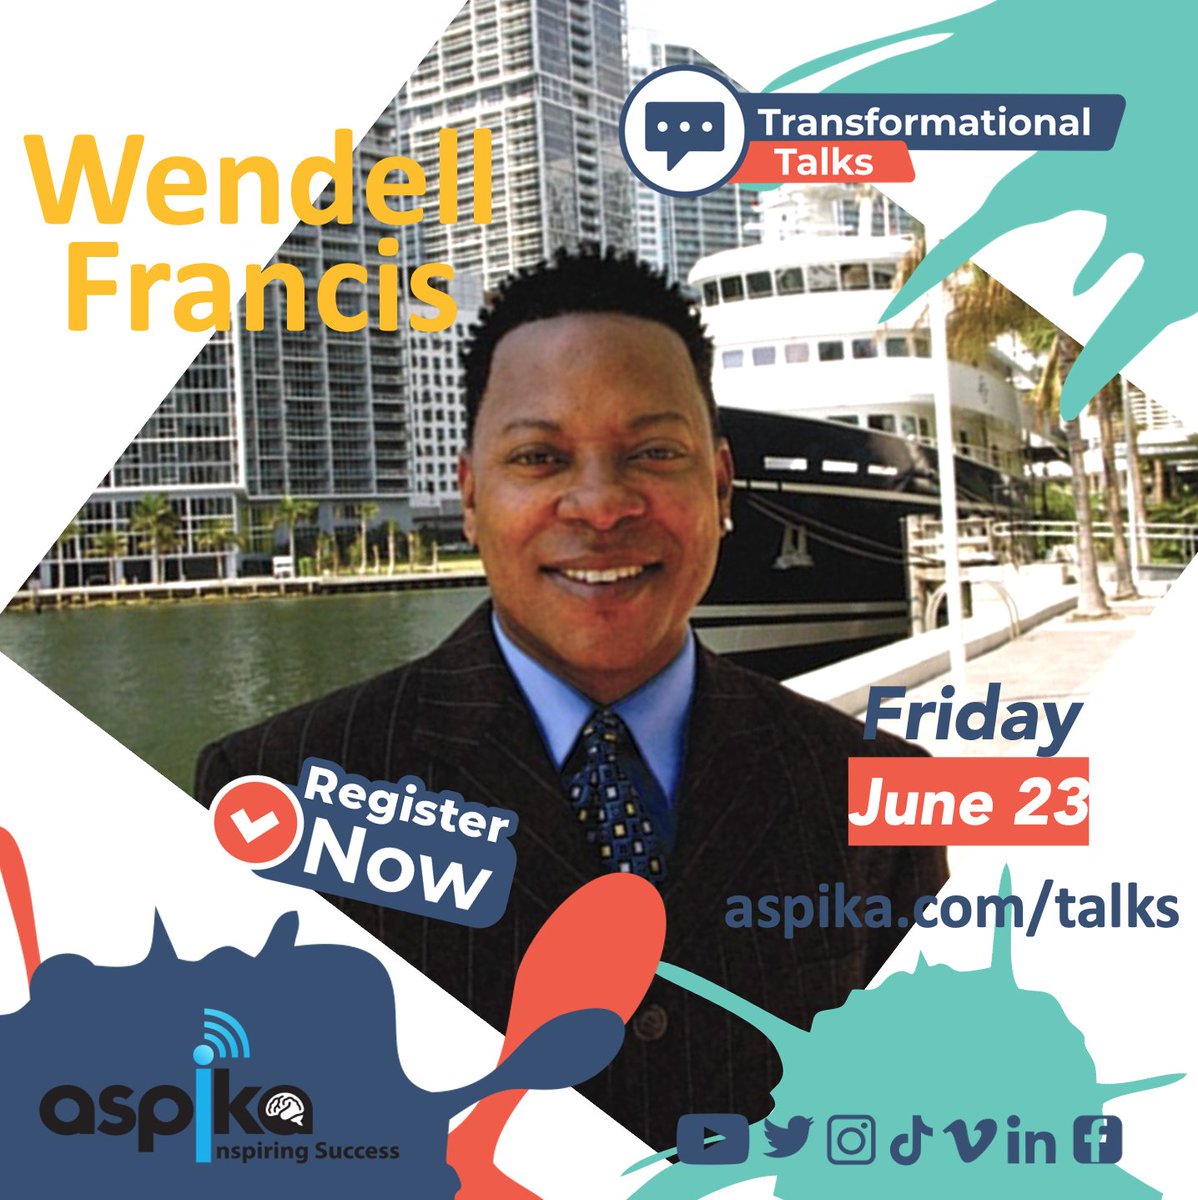 ASPIKA welcomes Wendell Francis
TOMORROW Friday, June 23
Register at aspika.com Talks
#aspika #neurodiversity #lovewhatyoudo #lovewhoyouare #loveyourself #beingme #careeropportunities #community #financialservices #investment #schools #university #students